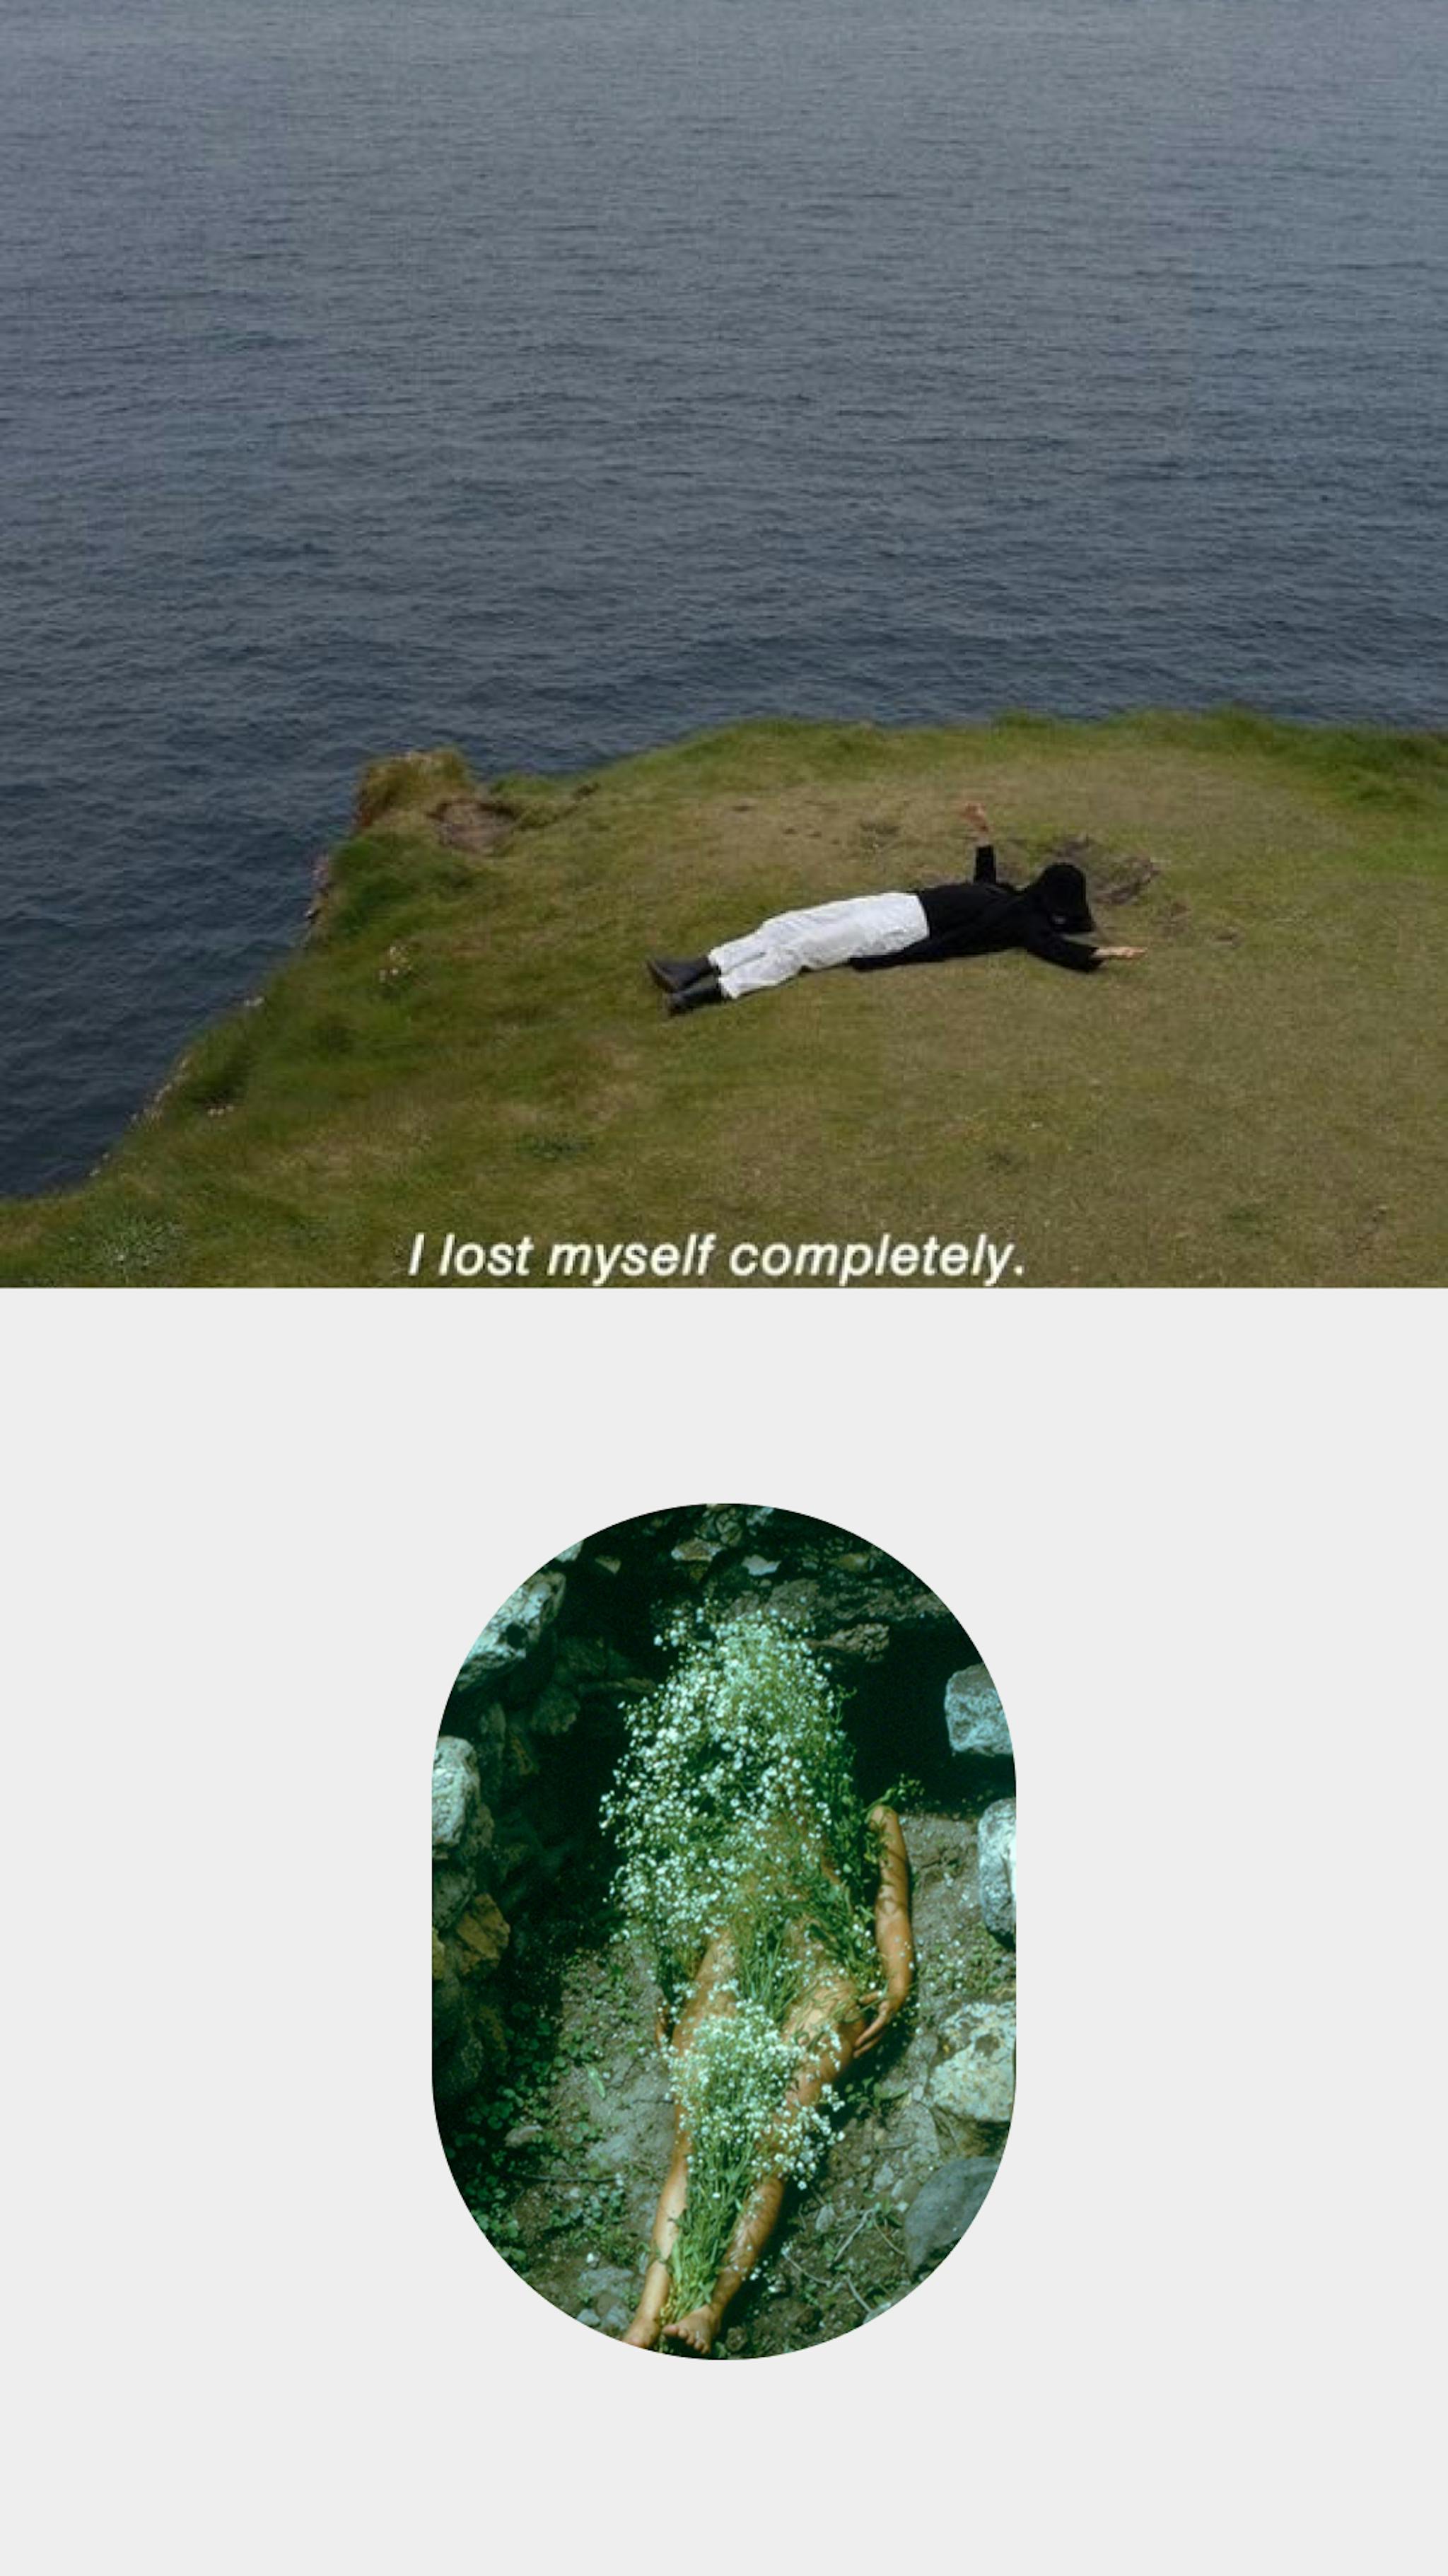 two images over layed, the top image is naked dfemale body covered in flowers, the square image below is a person lying on a cliff overlooking the sea with the text saying I lost myself completely.